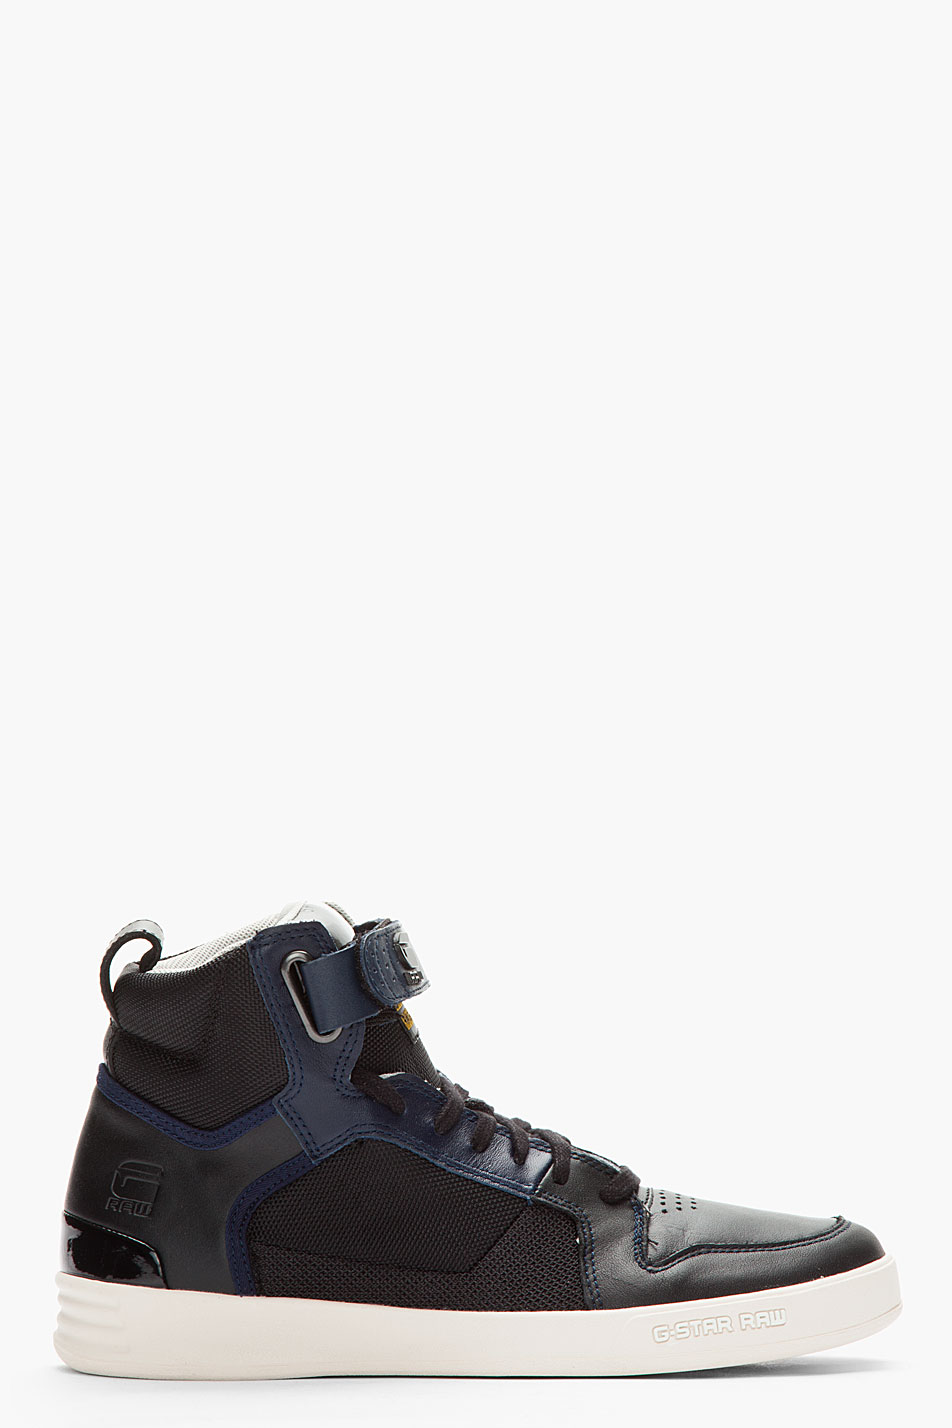 Lyst - G-star raw Navy Leathertrimmed Mesh Yard Bullion Sneakers in ...